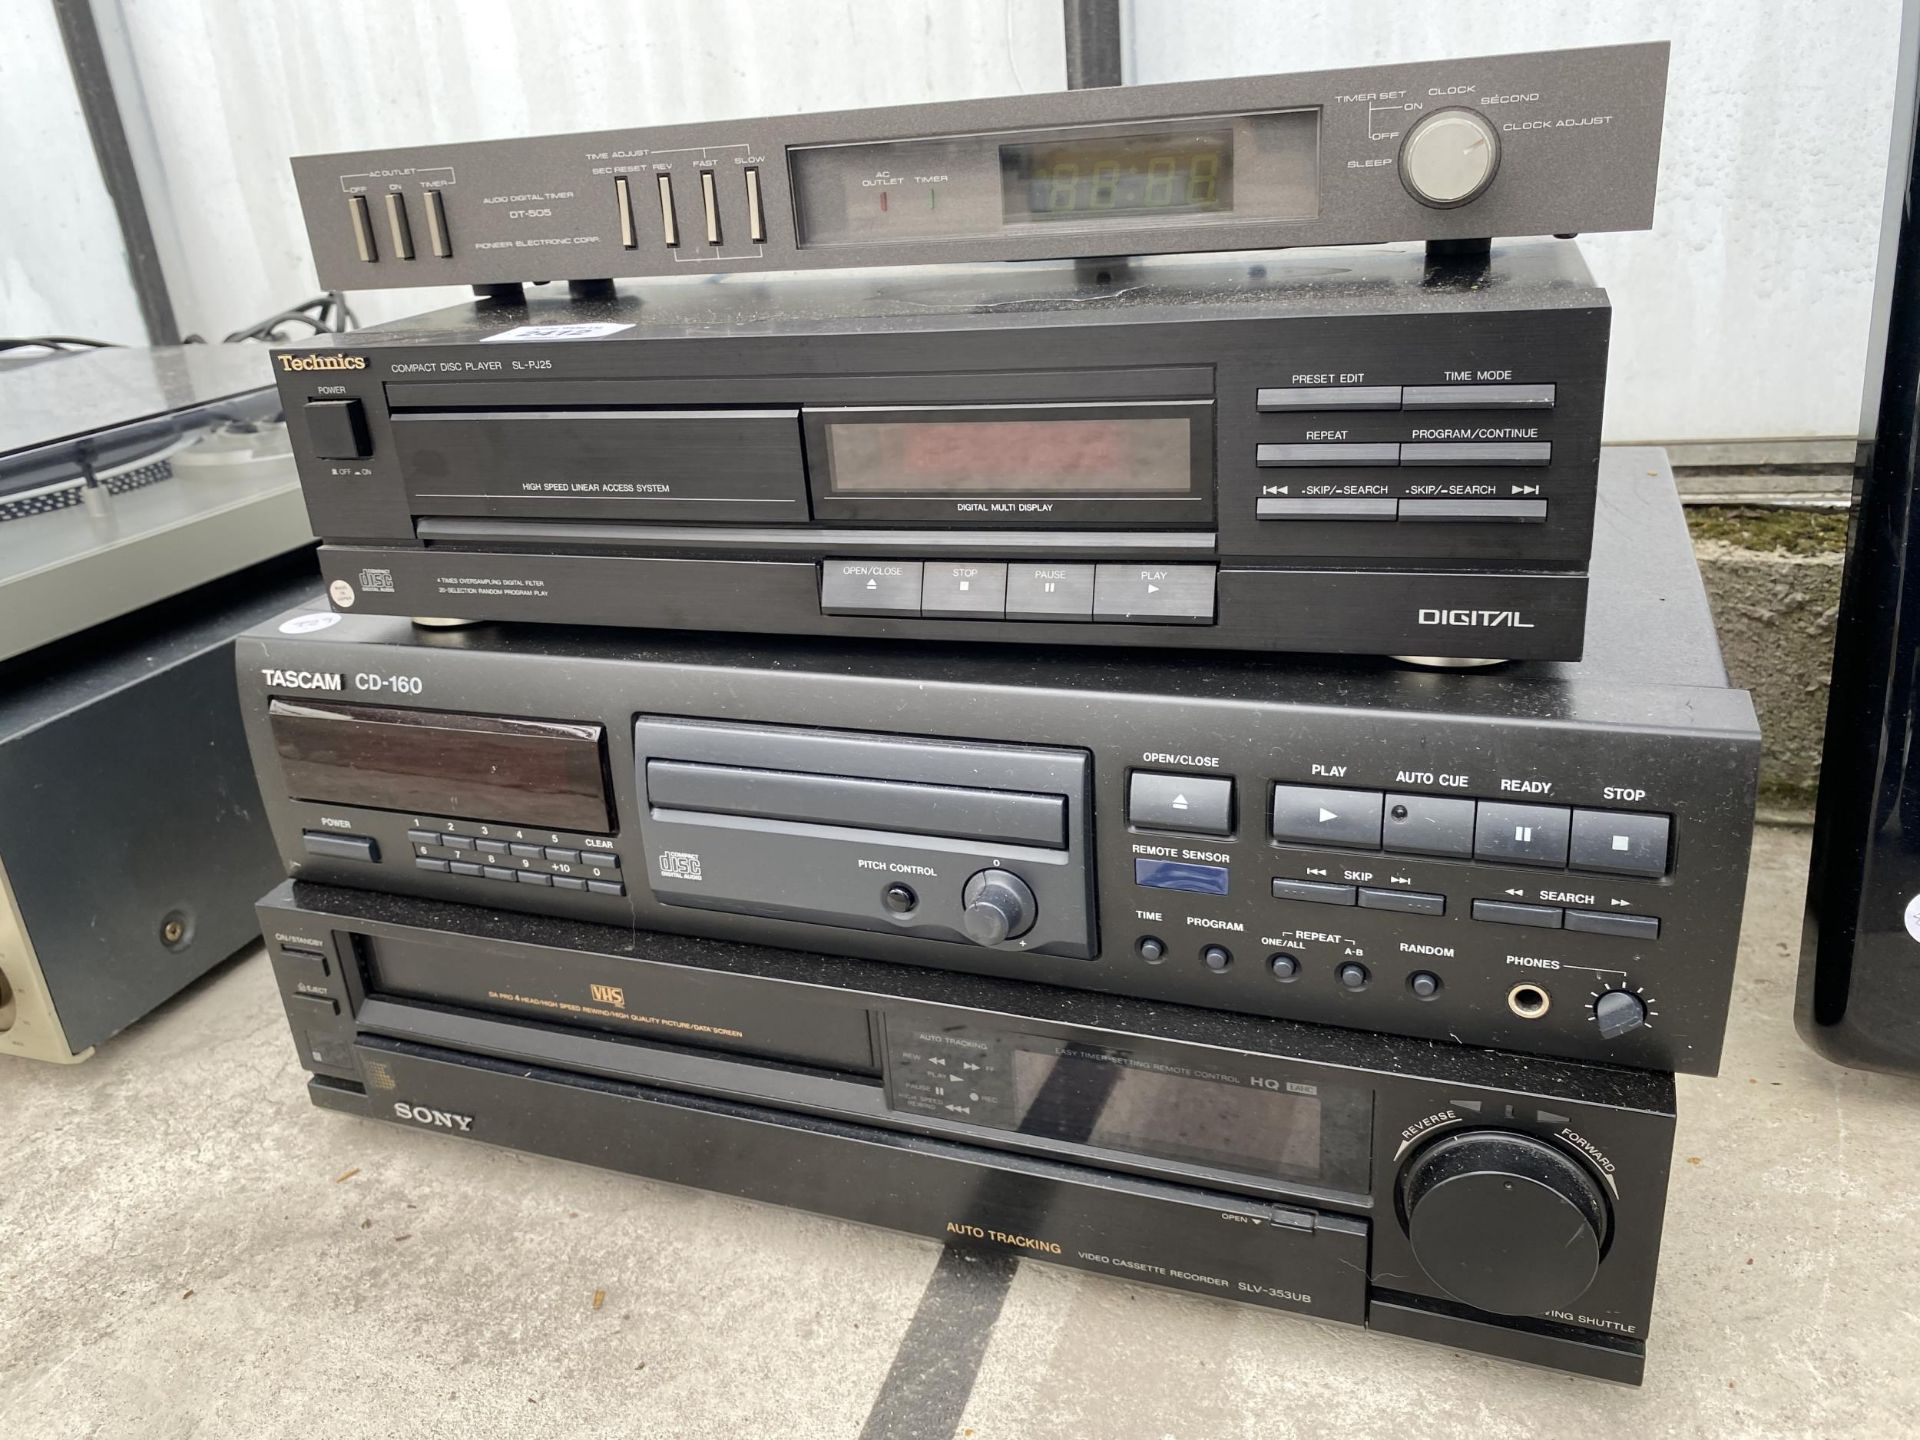 AN ASSORTMENT OF ITEMS TO INCLUDE A SONY VHS PLAYER, A TASCAM CD-160 AND A TECHNICS CD PLAYER ETC - Image 2 of 2